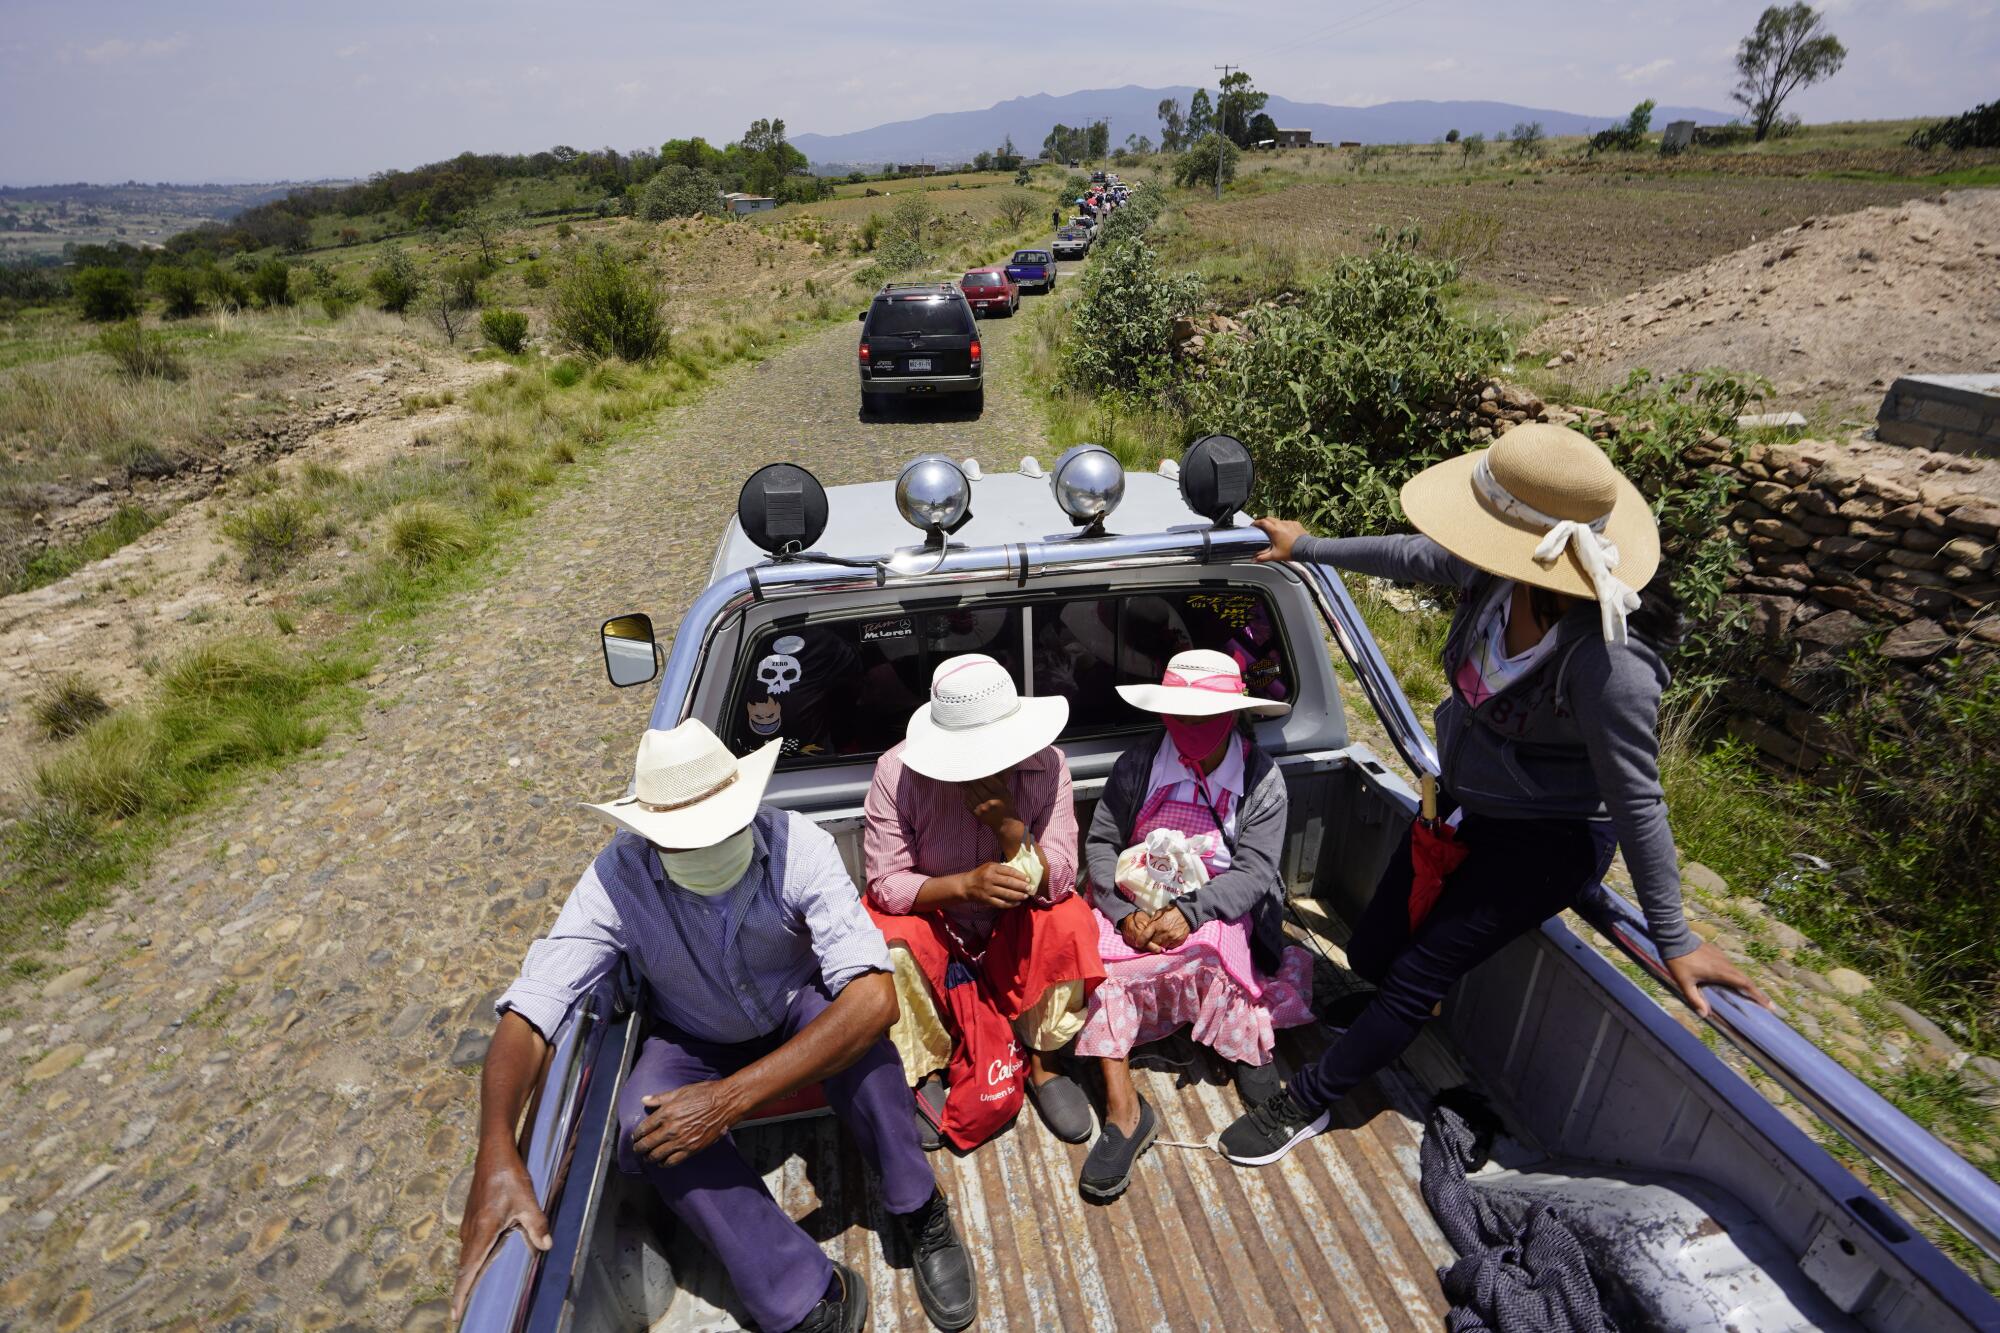 Family members ride on the back of a truck towards the cemetery at El Rincón de San Ildefonso on Thursday.